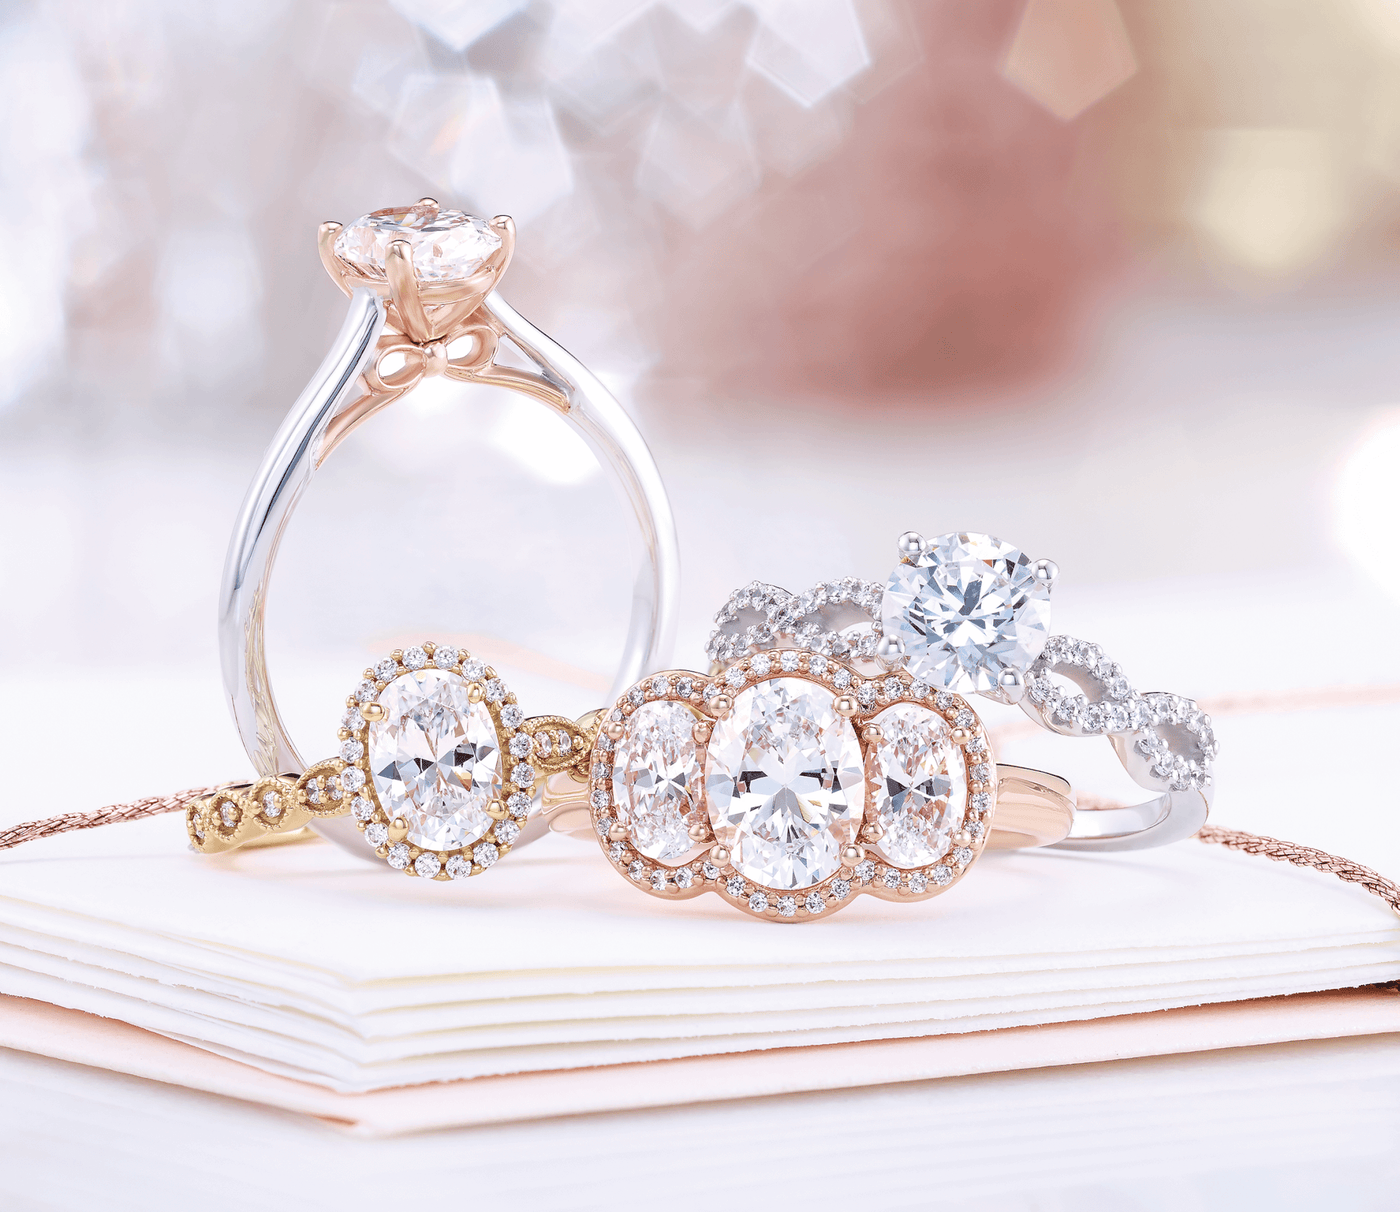 Rose, Yellow, or White Gold: What’s Best for an Engagement Ring?